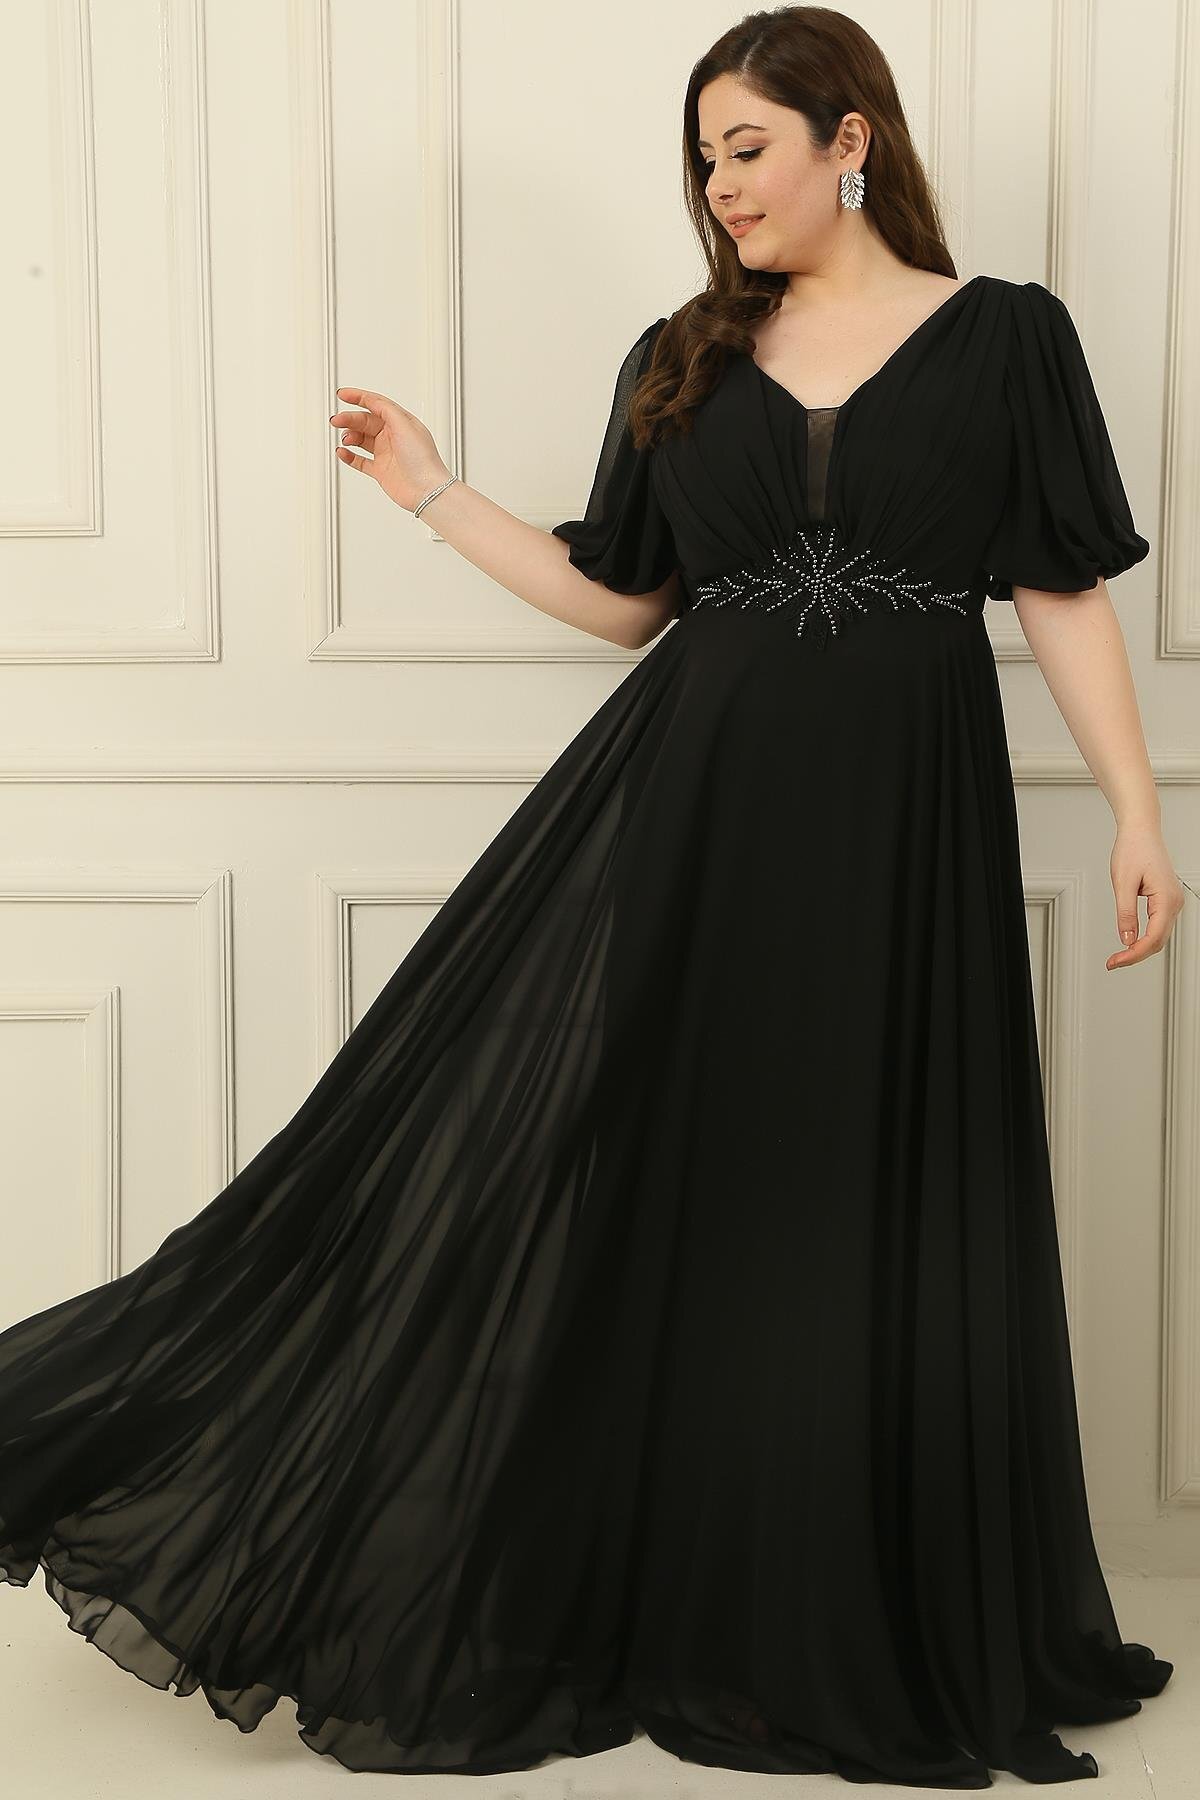 Levně By Saygı Plus Size Long Chiffon Dress With A V-Neck Front Beaded Waist Draped and Lined Front Back